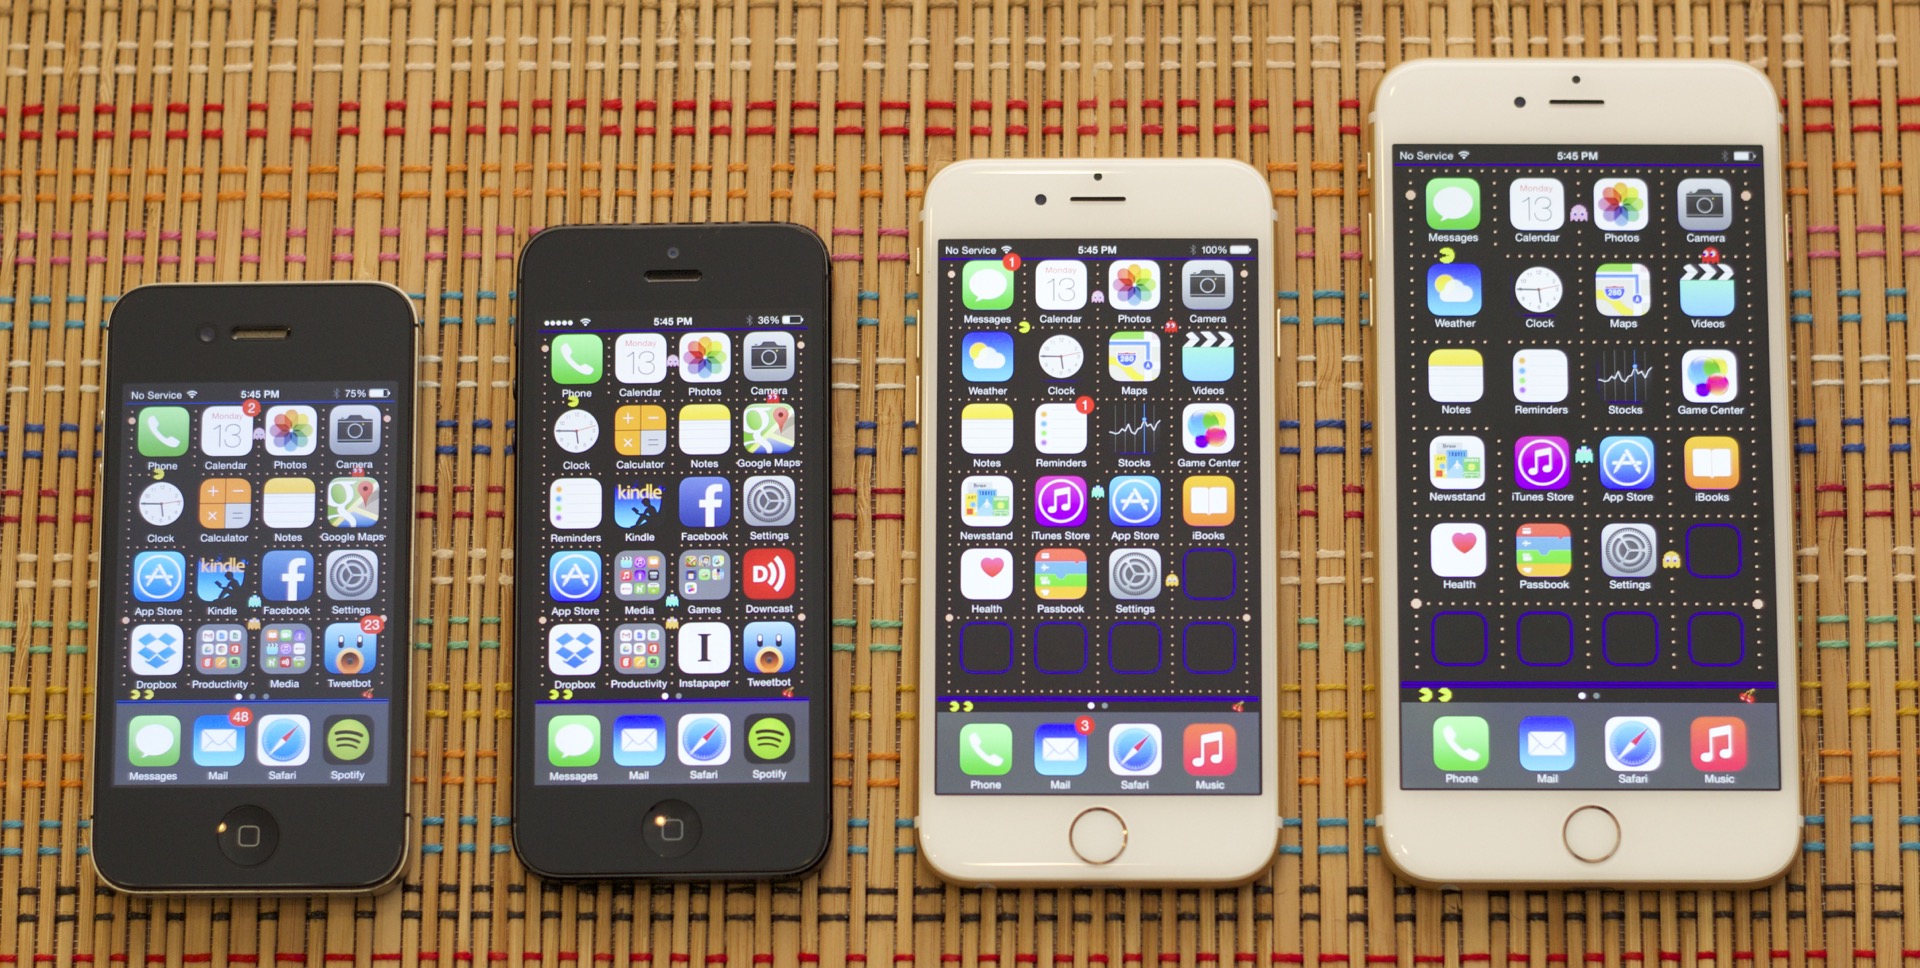 Comparing the original iPhone to the iPhones 6 and 6 Plus